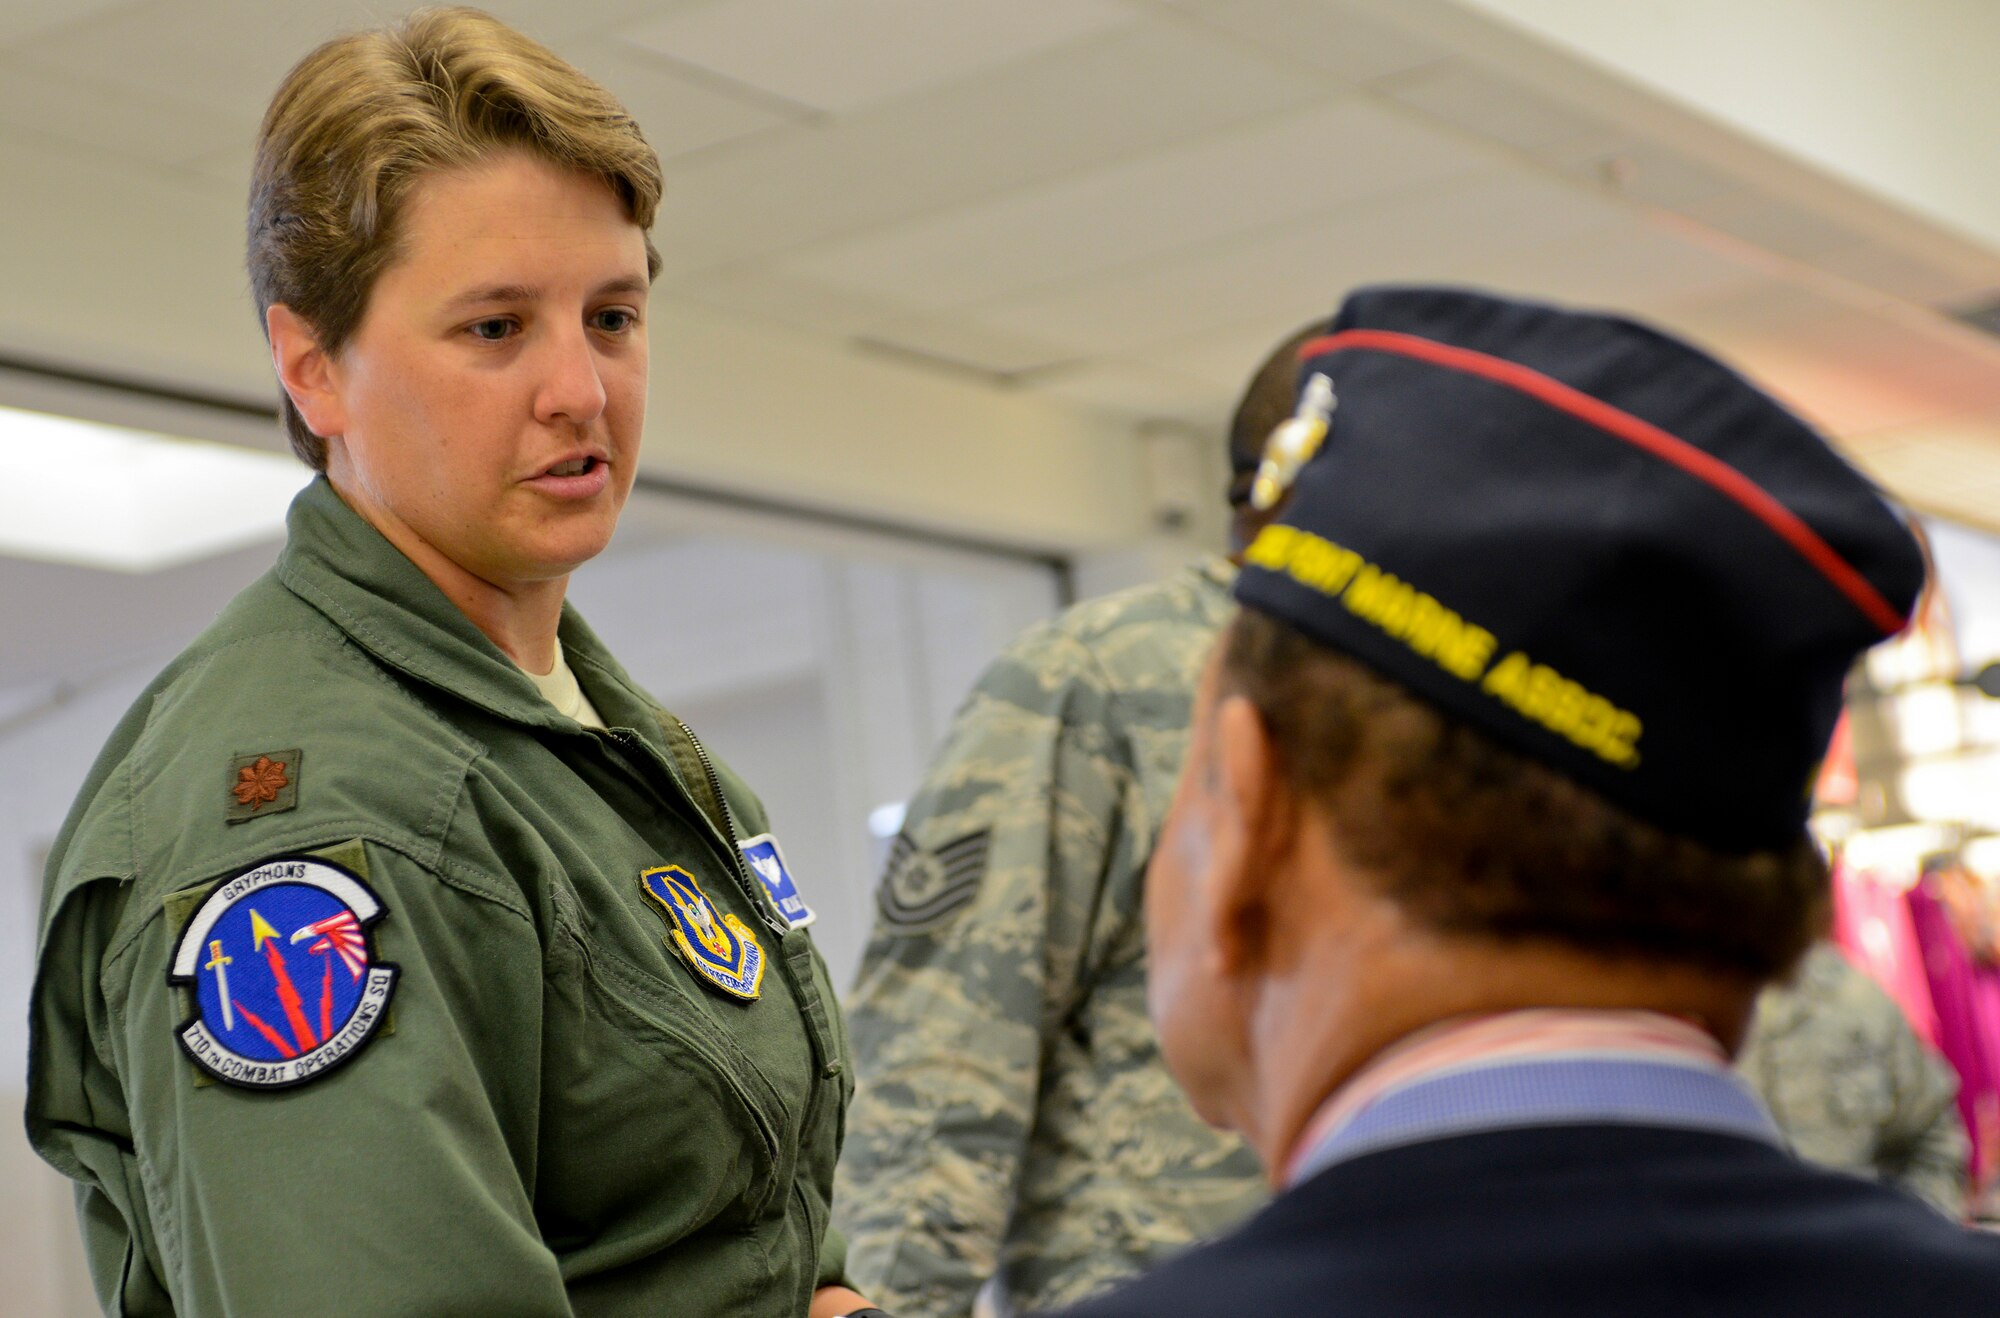 U.S. Air Force Maj. Dixie Duke, 710th Combat Operations Squadron assistant director of staff, speaks to a Montford Point Marine at the Exchange on Langley Air Force Base, Va., July 2, 2013. The retired Marines are part of the Tidewater chapter of the Montford Point Marine Association, a non-profit organization founded to memorialize the legacy of the first African-Americans to serve in the Marine Corps. (U.S. Air Force photo by Airman 1st Class R. Alex Durbin/Released)